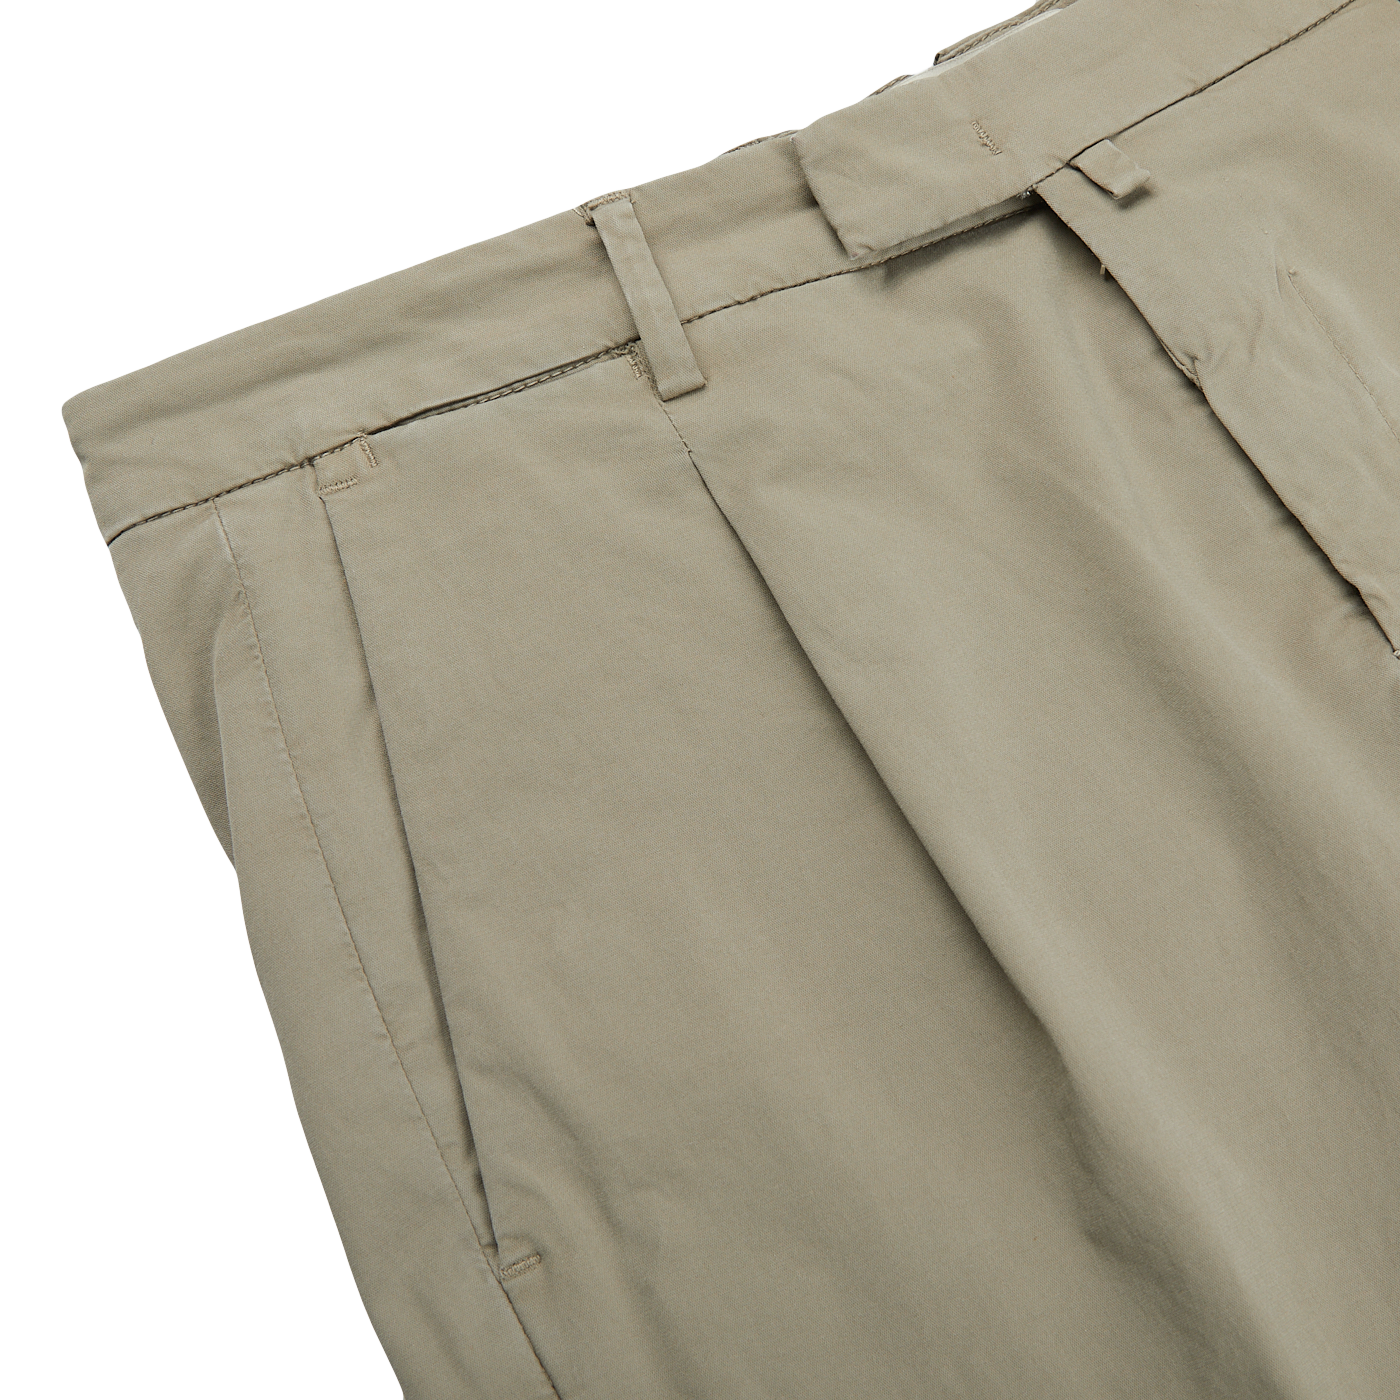 A close up of Mole Cotton Stretch BG07 Pleated Chinos from Italian trouser specialist Briglia, crafted from cotton with stretch.